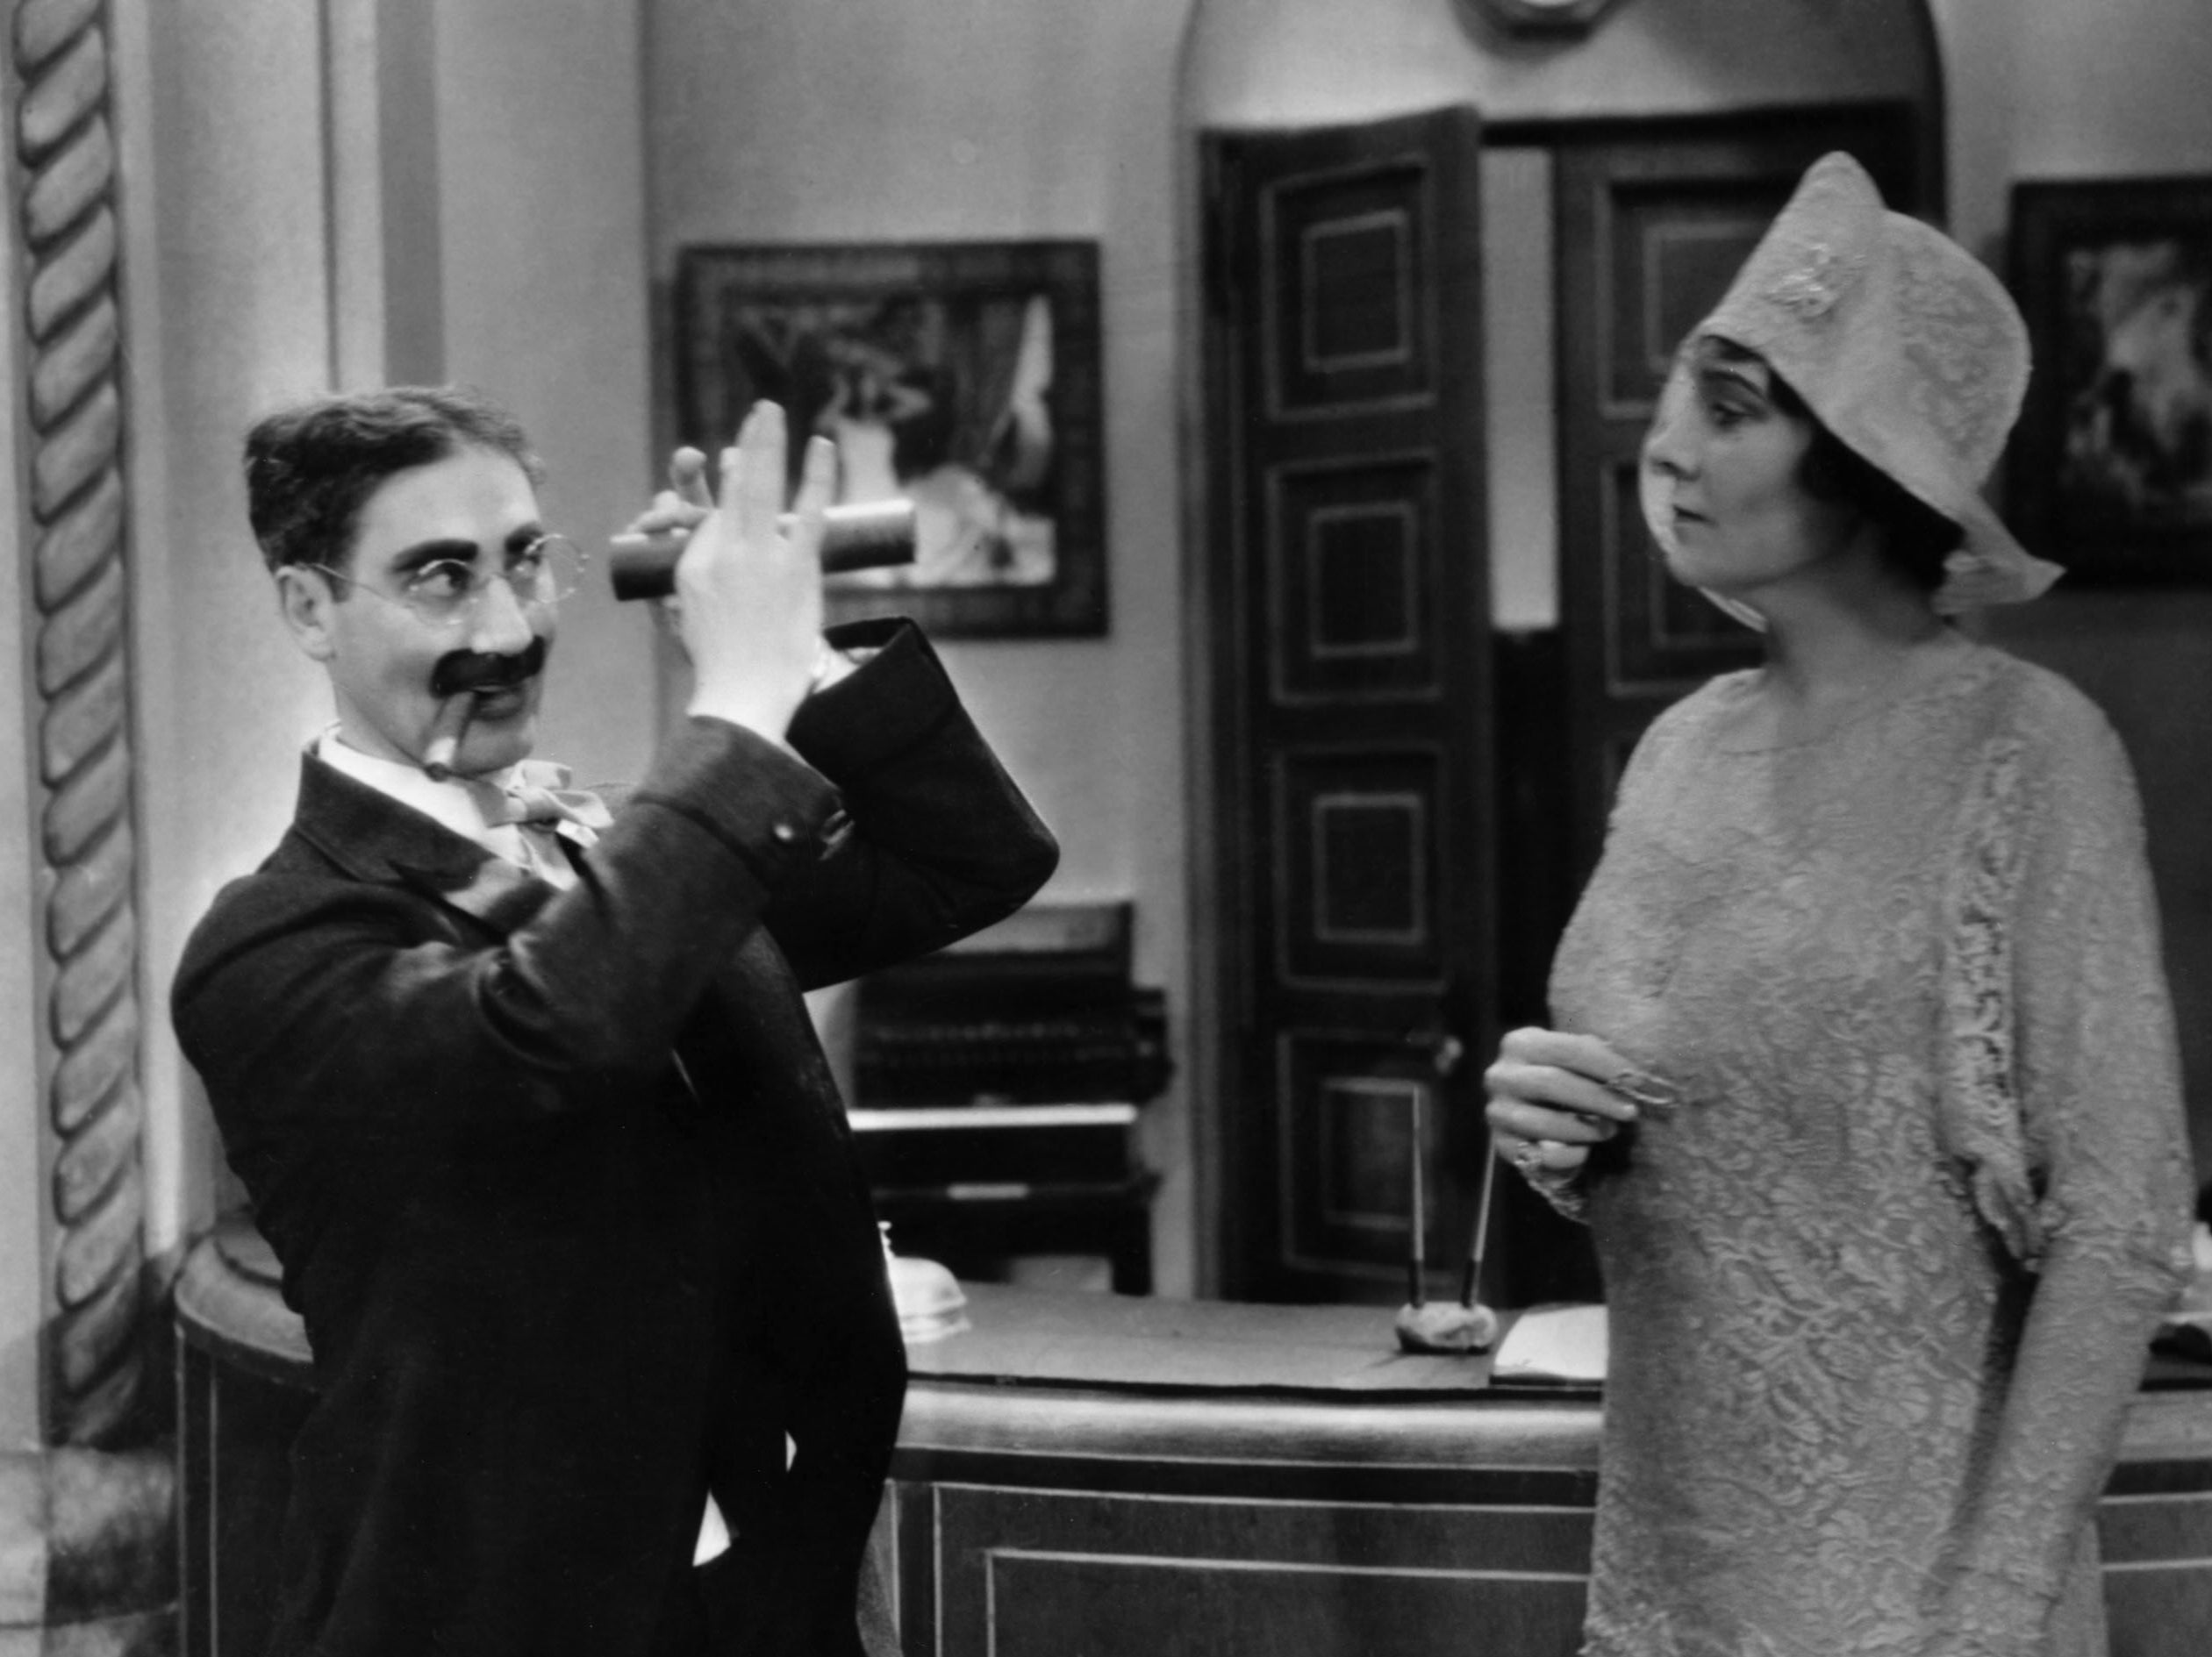 There was a devilish relish in the way Groucho used to torment the matronly Margaret Dumont in the classic Marx Brothers movies